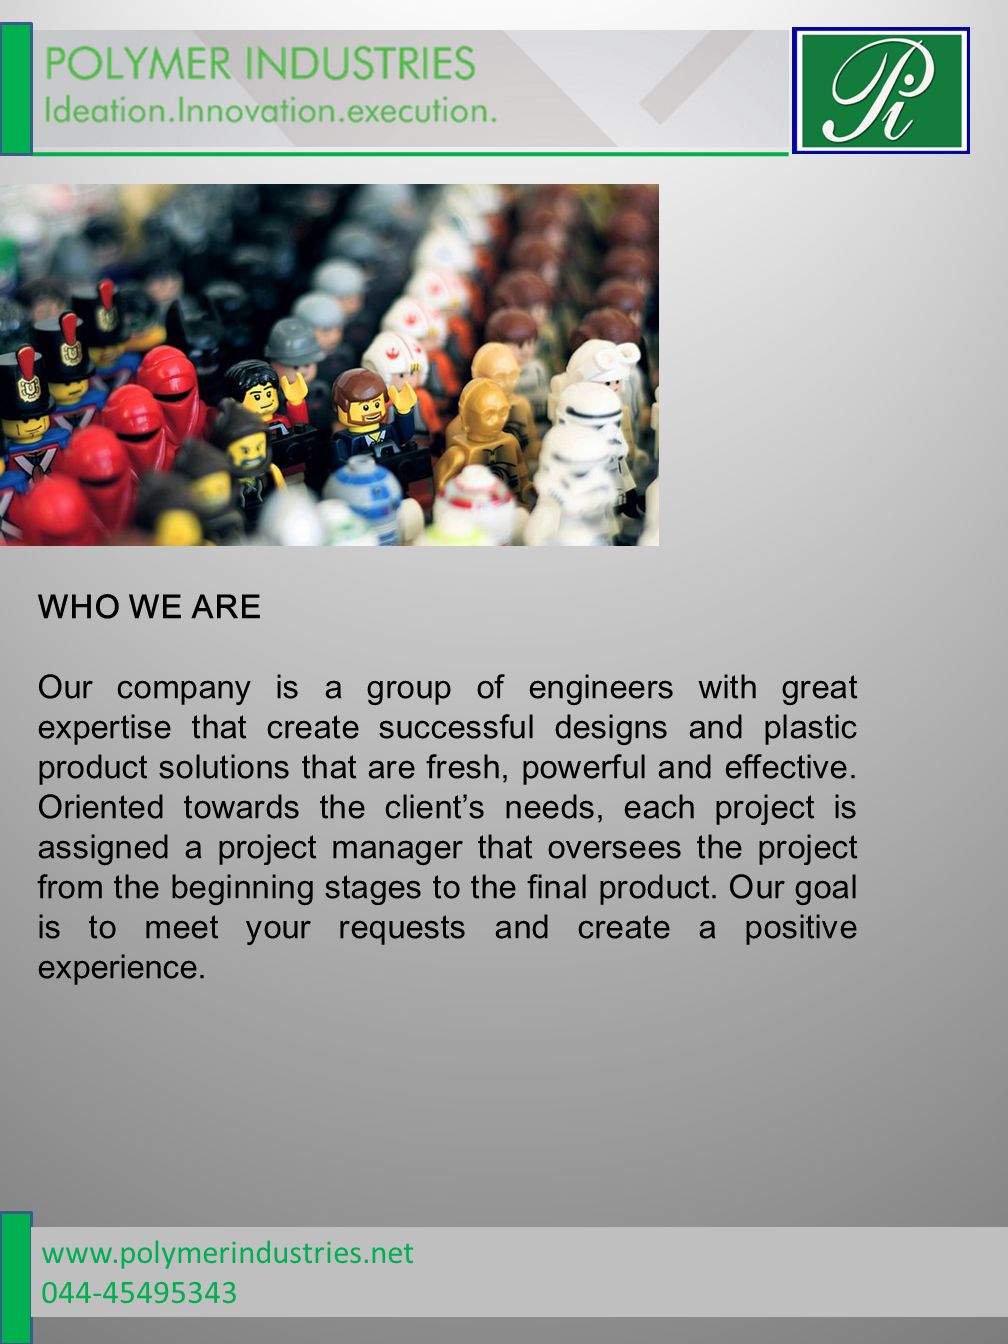 WHO WE ARE Our company is a group of engineers with great expertise that create successful designs and plastic product solutions that are fresh, powerful and effective.